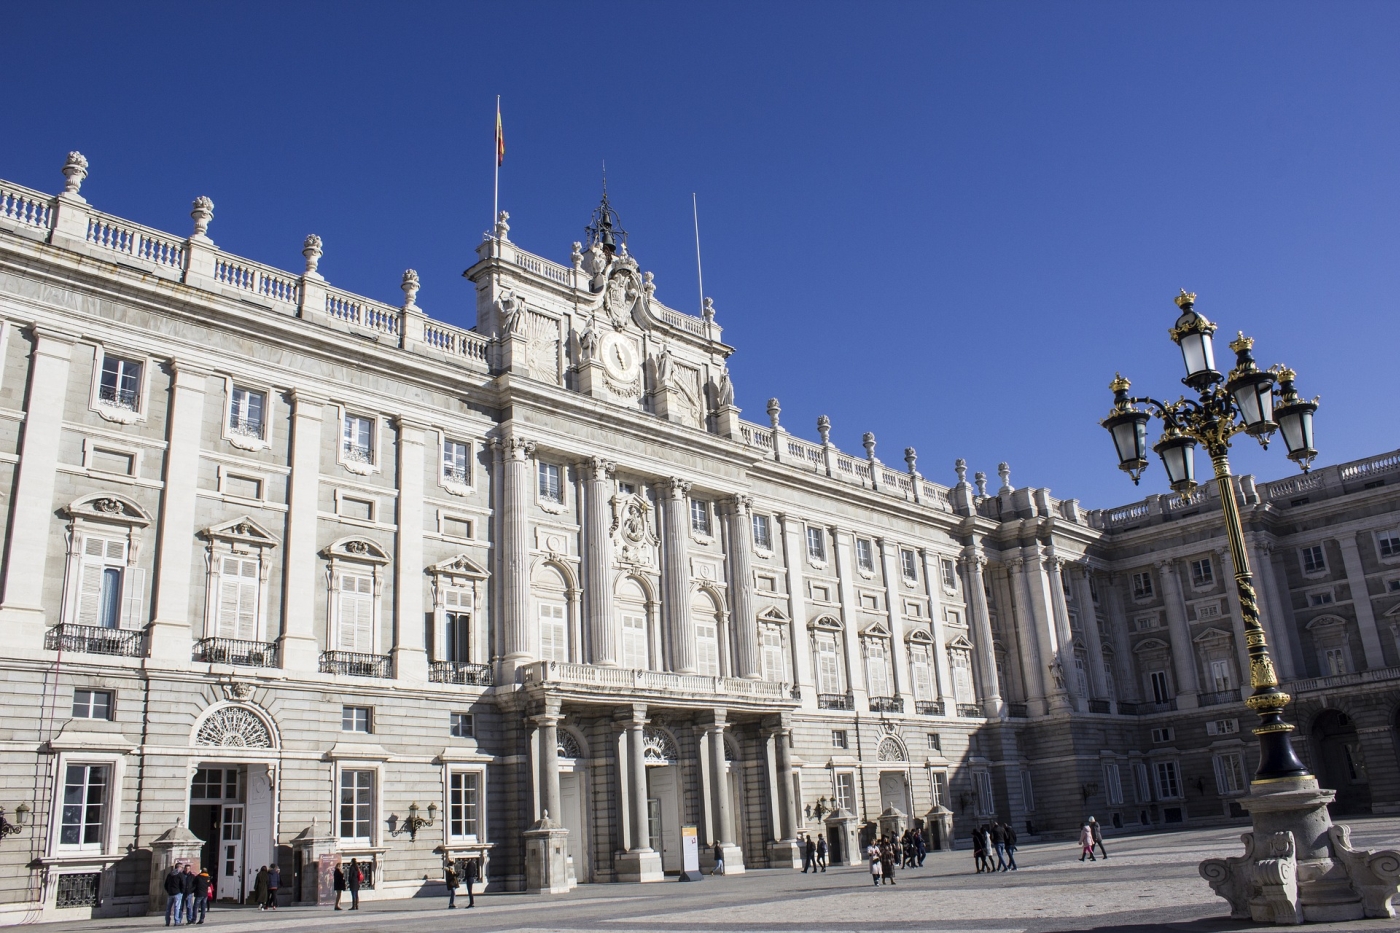 Royal Palace in Madrid Spain